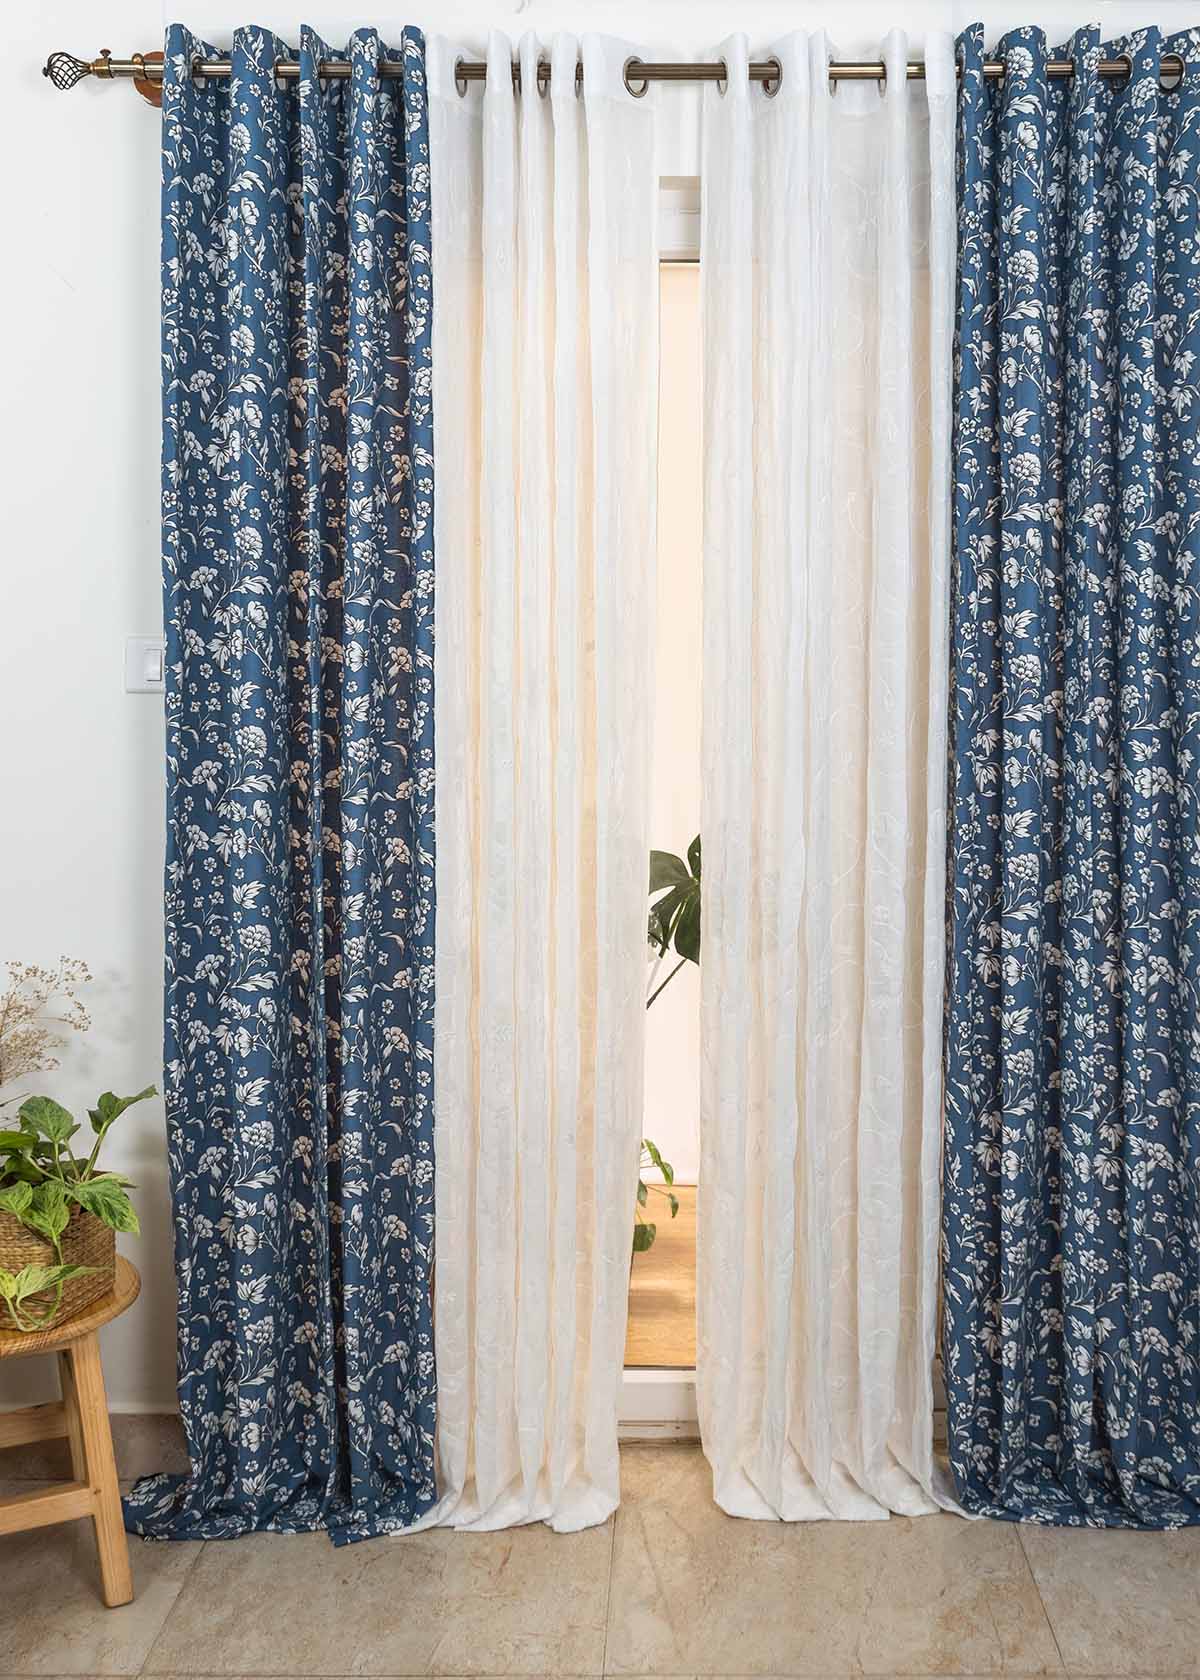 Marigold Royal Blue, Ivy Vines Embroidered Pure White Sheer Set Of 4 Combo Cotton Curtain - Royal Blue White